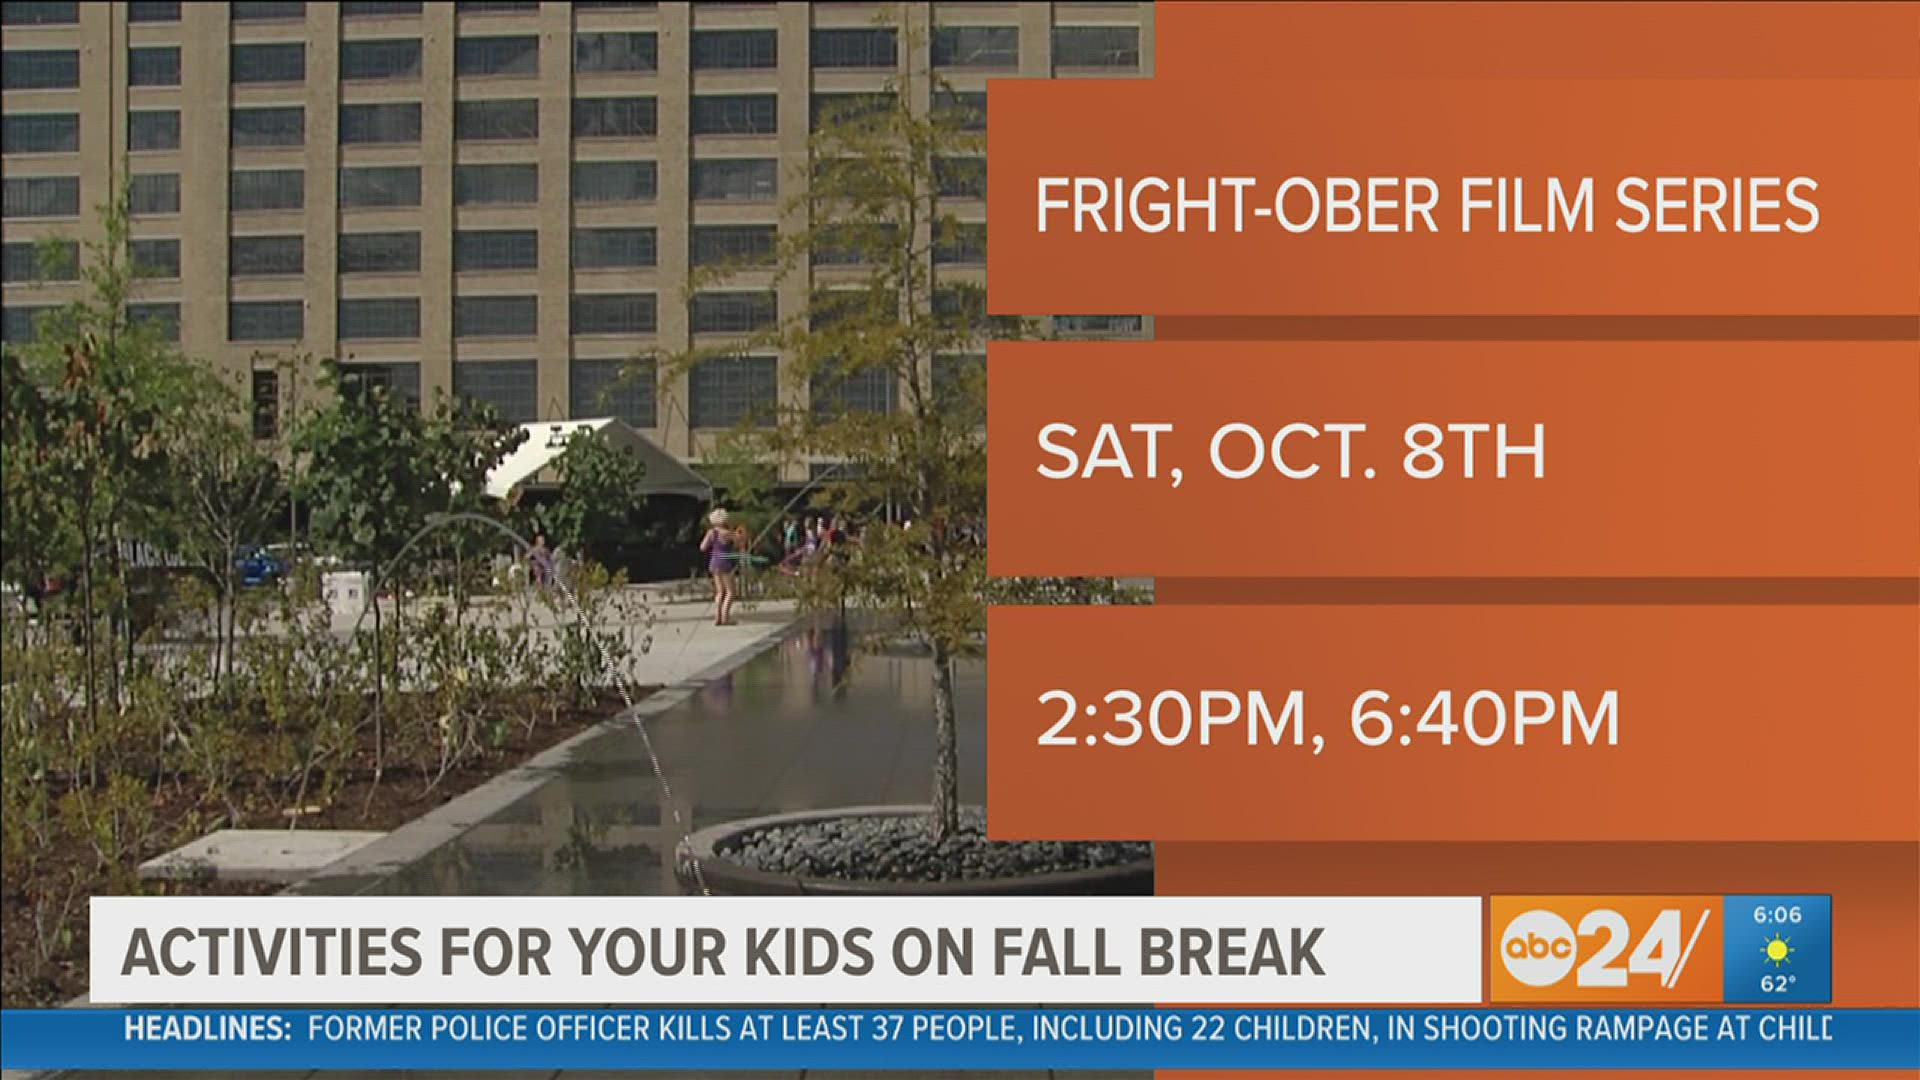 Here are a few kid friendly things you can do over fall break.